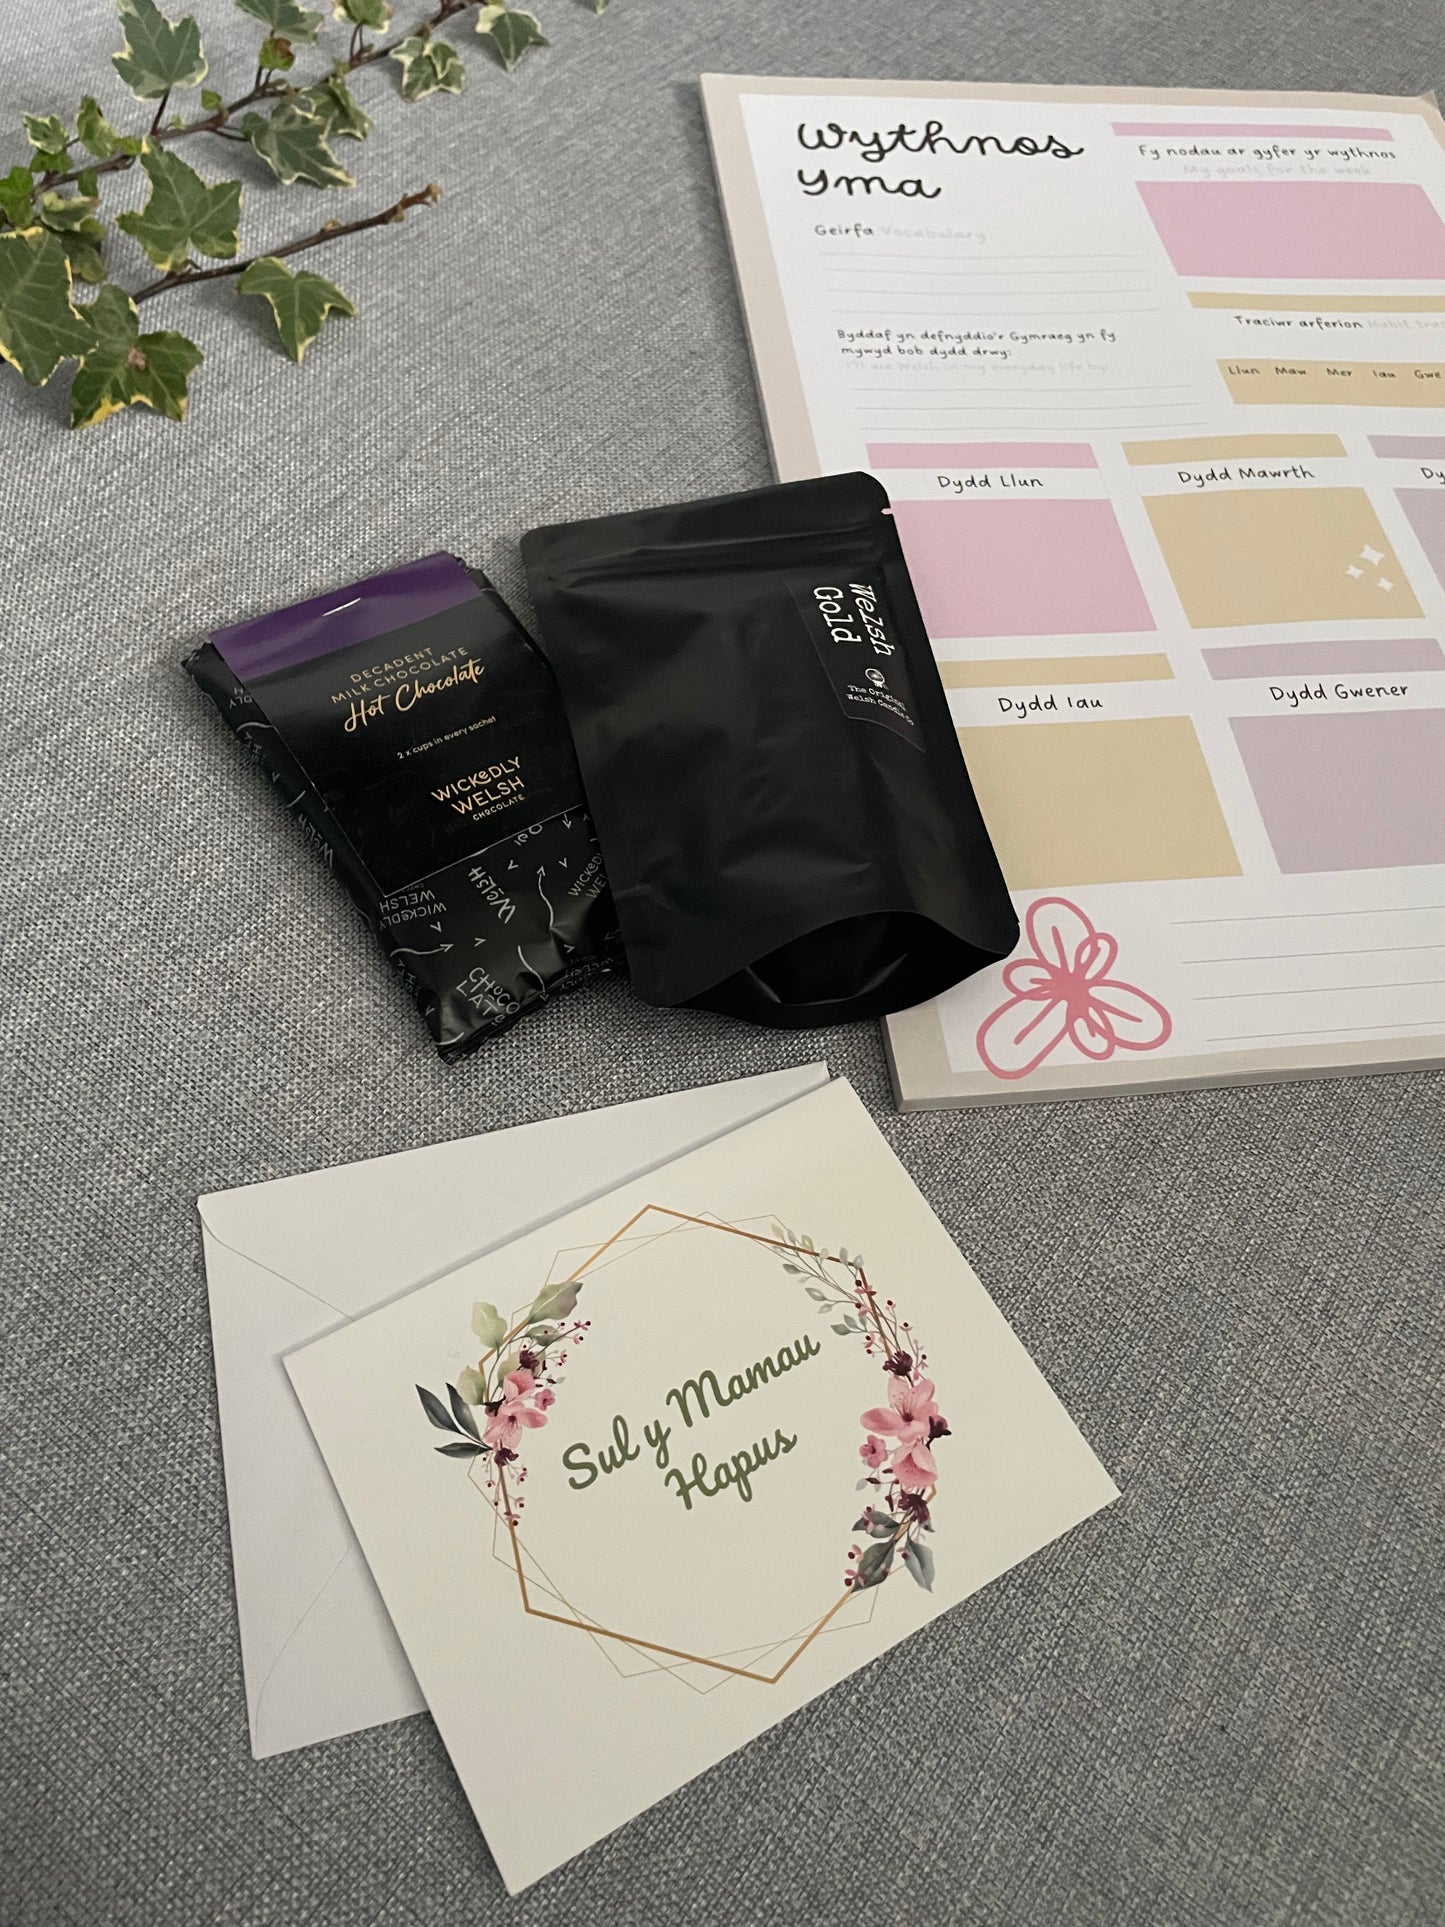 Welsh Mother's Day Gift Pack with A3 Desk Planner and Wax Melts- Sul Y Mamau Hapus